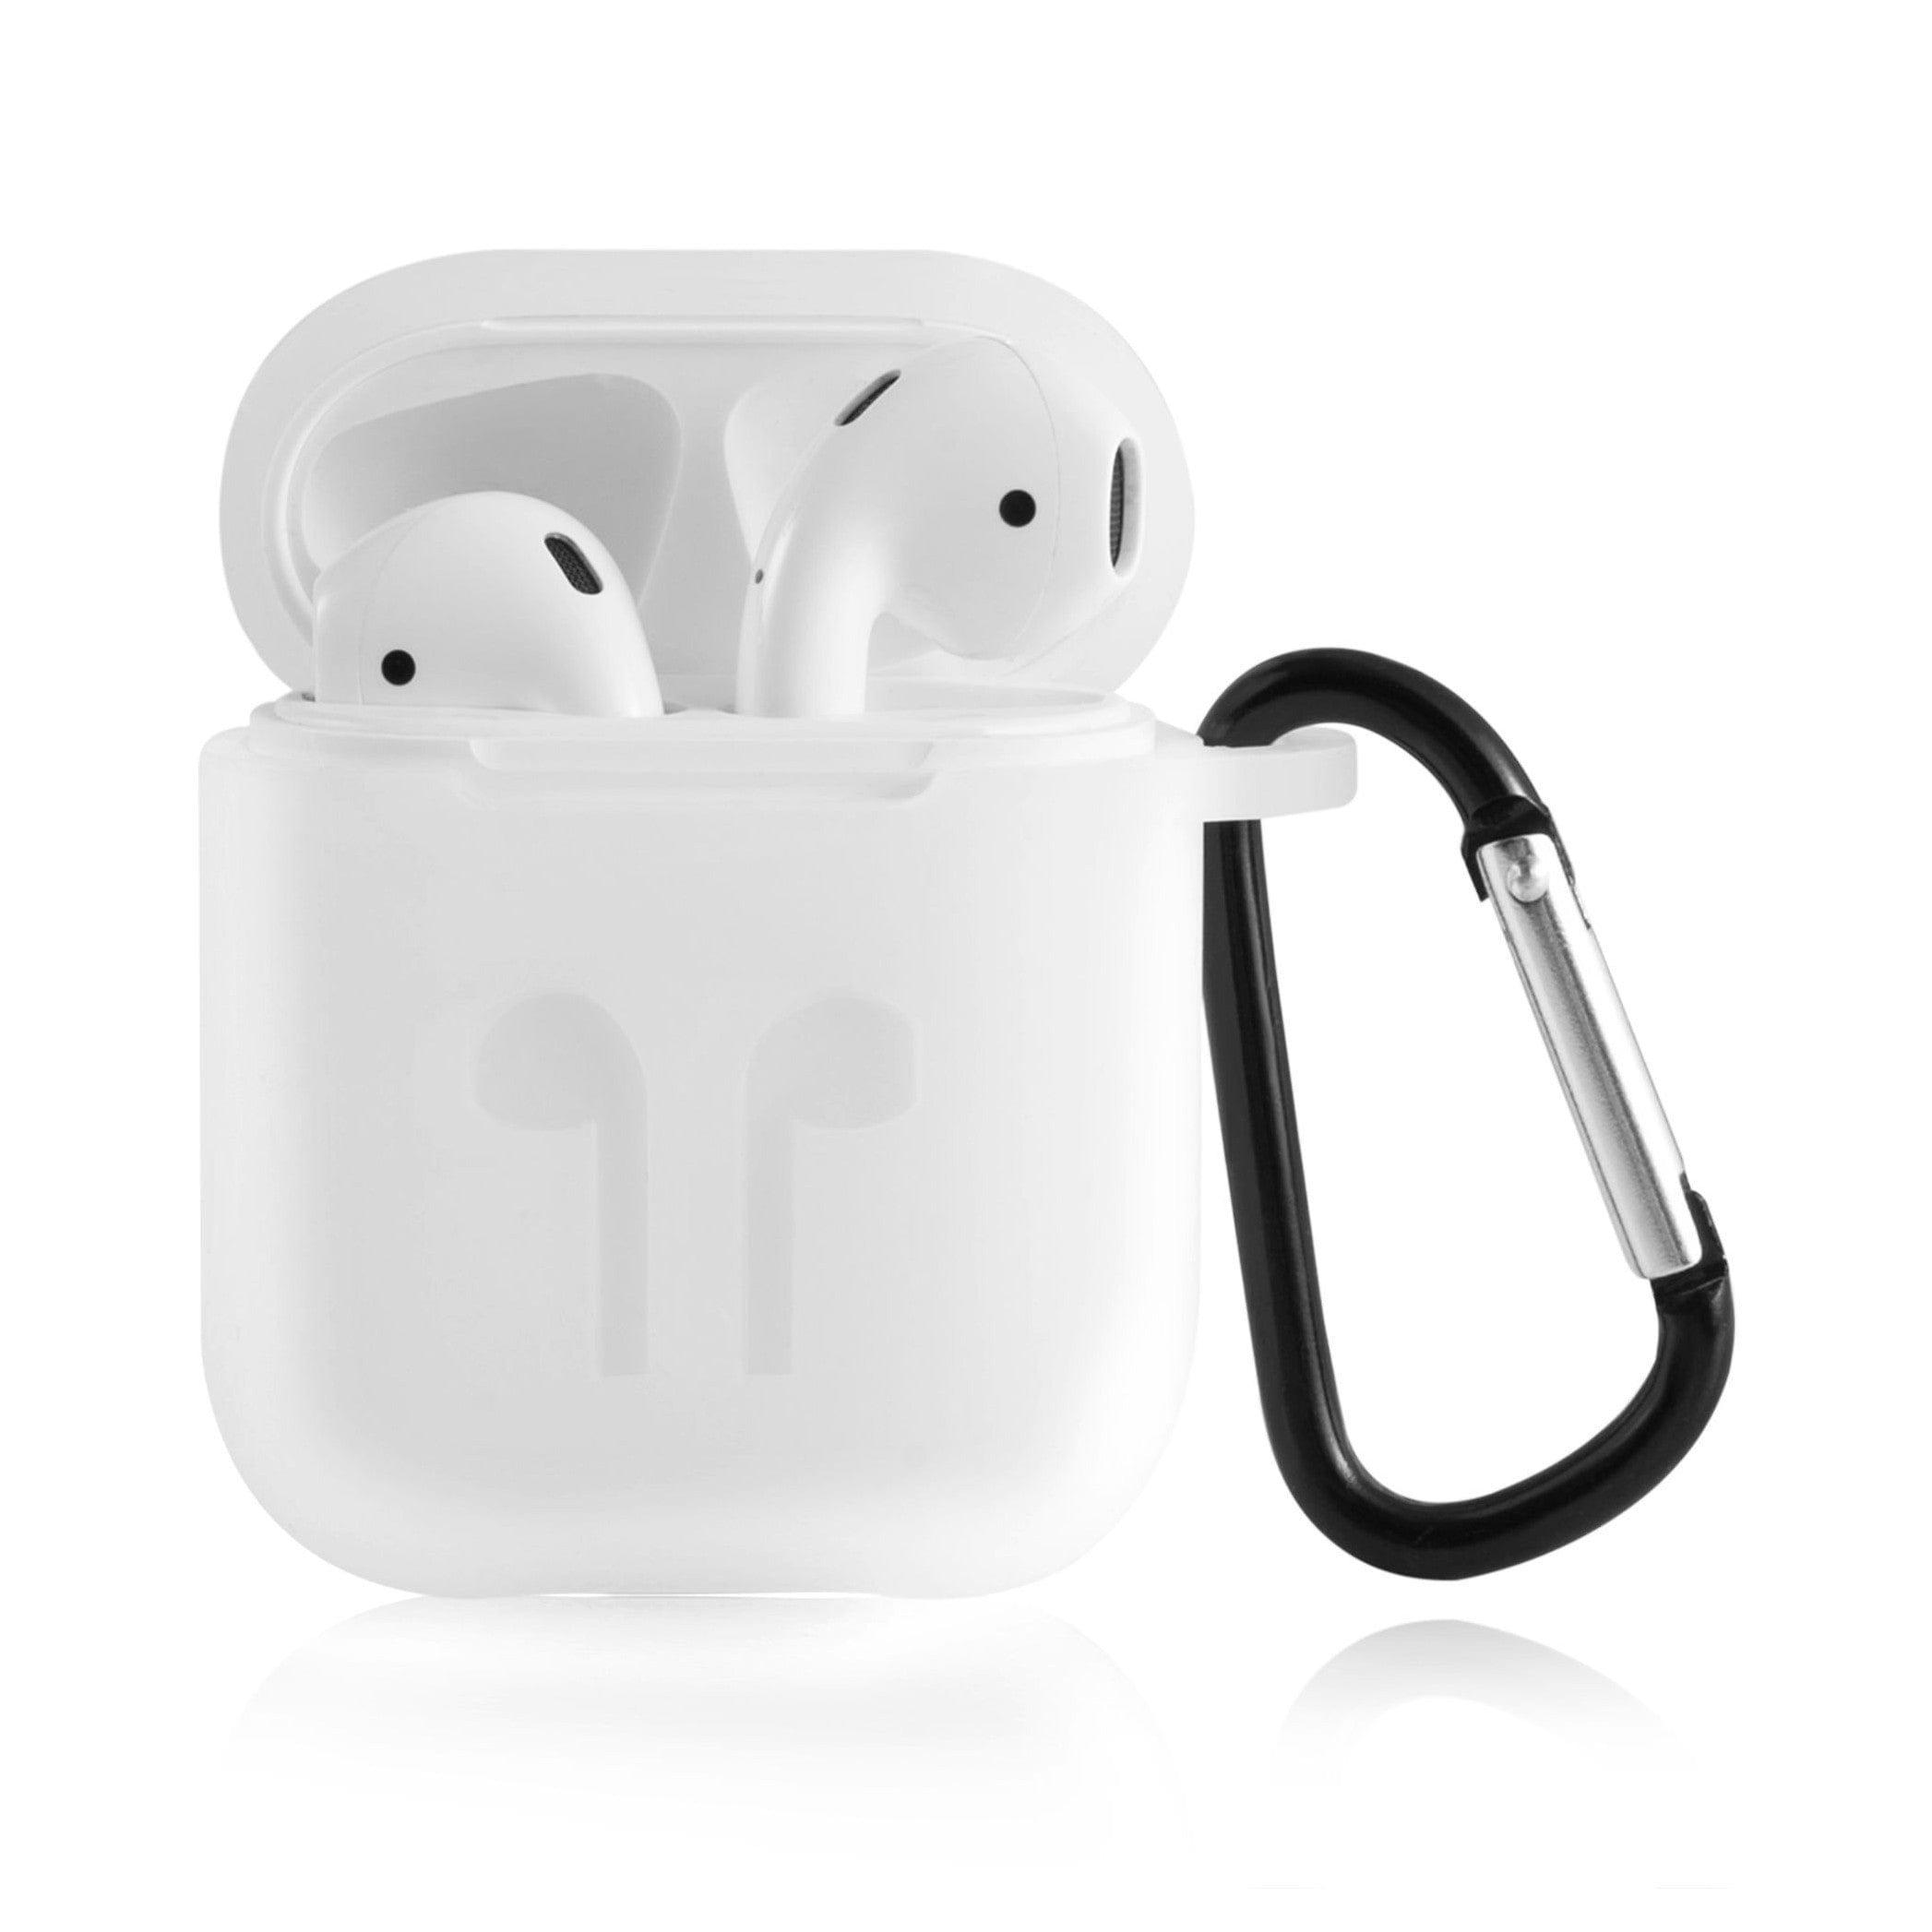 Silicone Soft Case for Apple Airpods 1 & 2, Airpods Pro - A to Z Prime